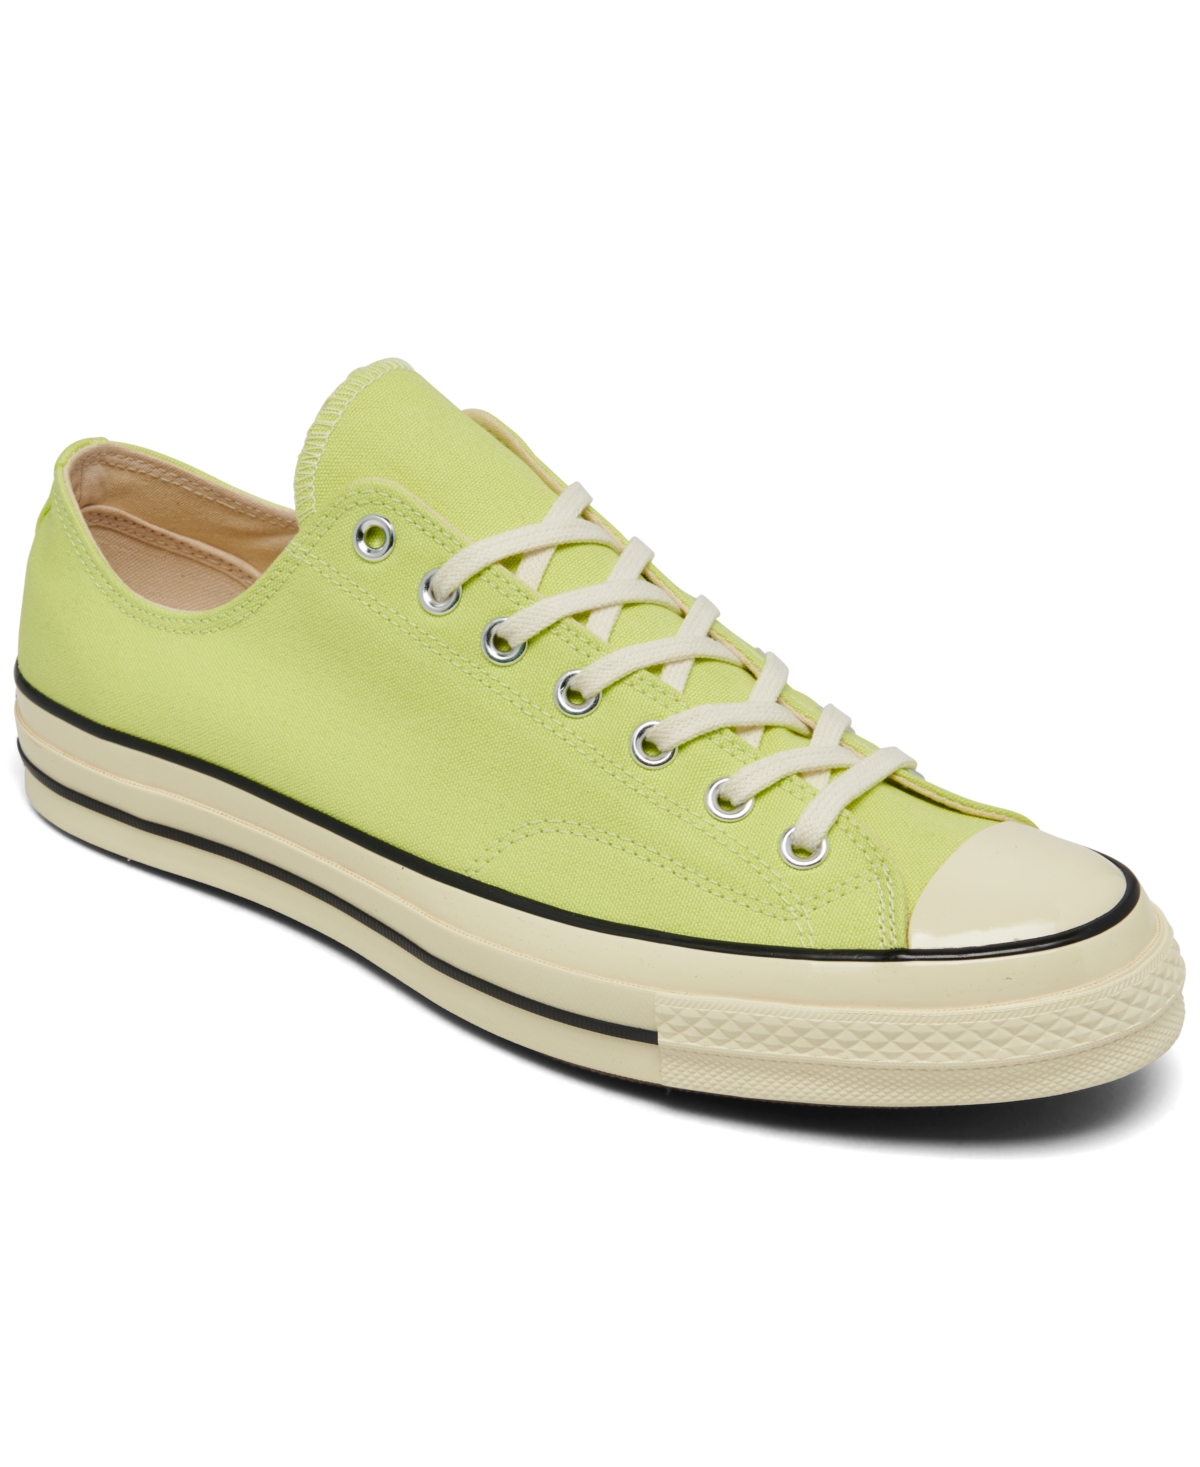 Men's Chuck 70 Canvas Low Top Casual Sneakers from Finish Line - Citron This/Egret